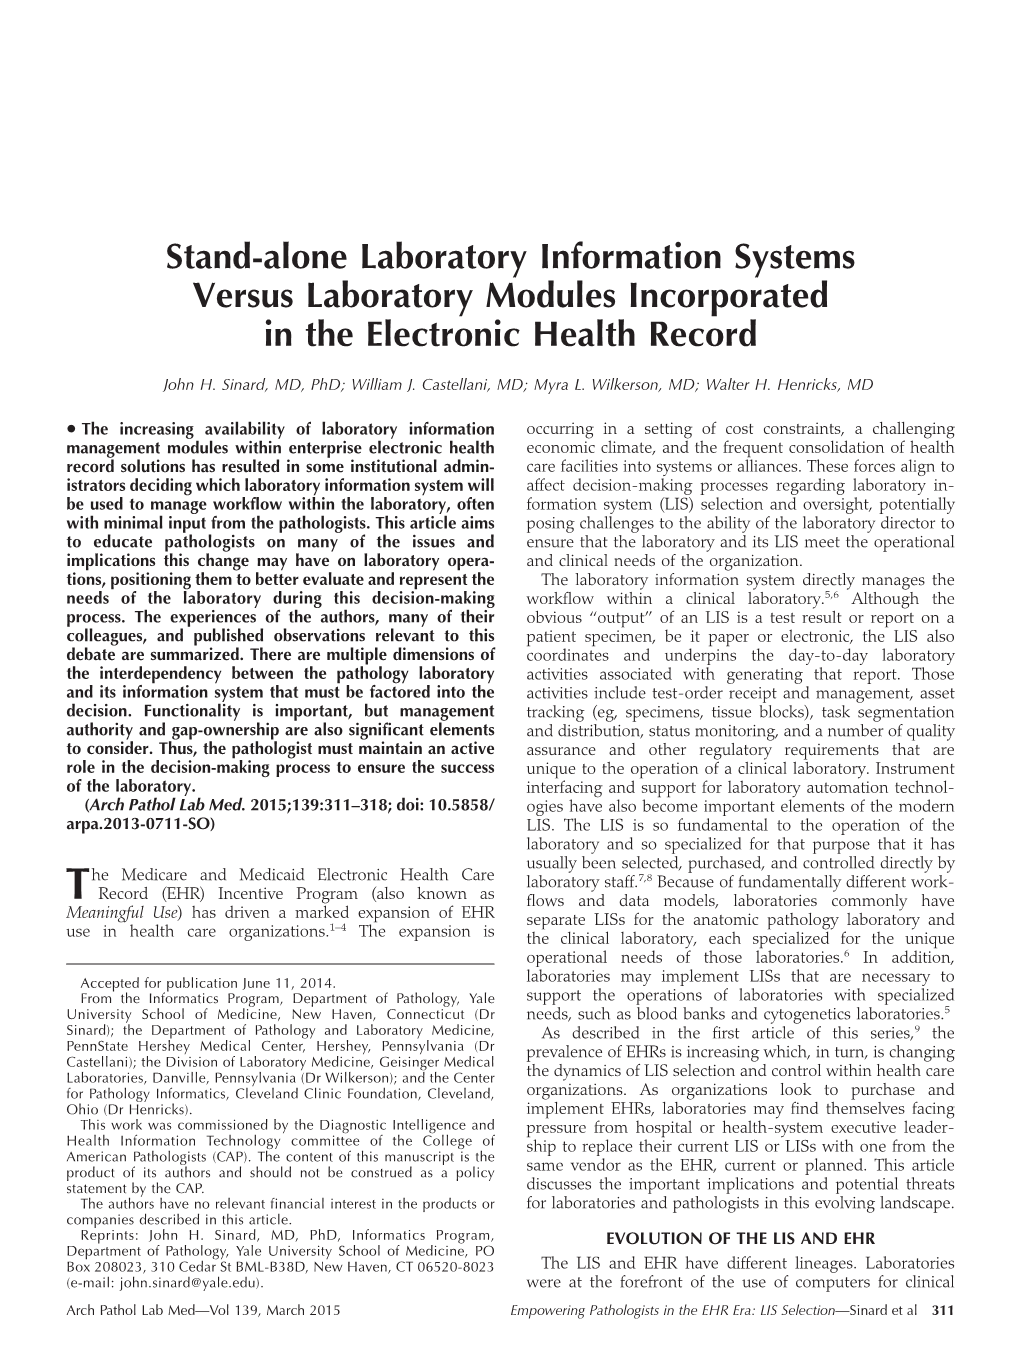 Stand-Alone Laboratory Information Systems Versus Laboratory Modules Incorporated in the Electronic Health Record